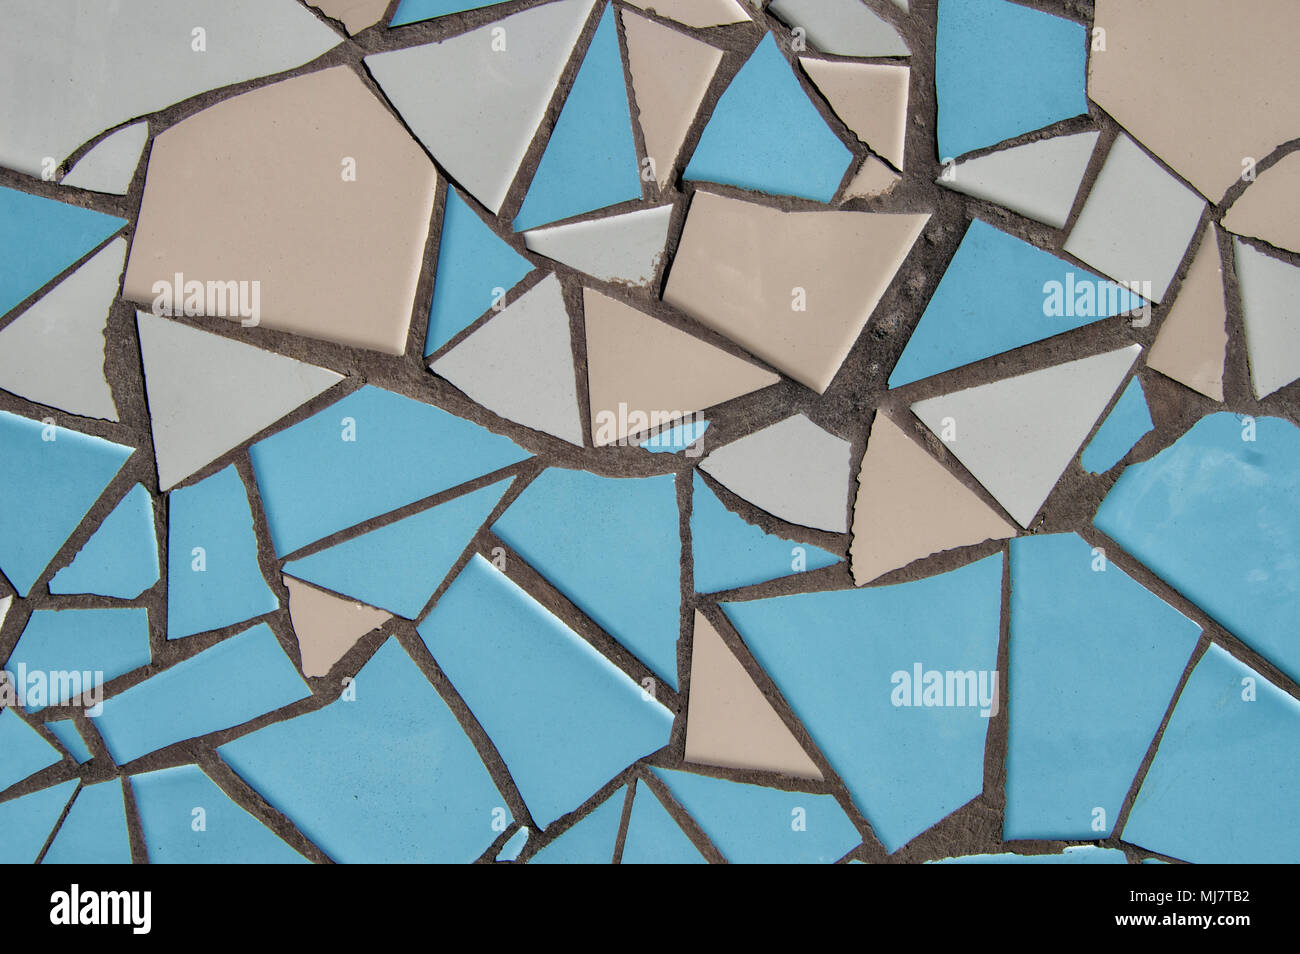 background with Broken tile mosaic in blue and beige colors on the exterior facade of a building. Stock Photo